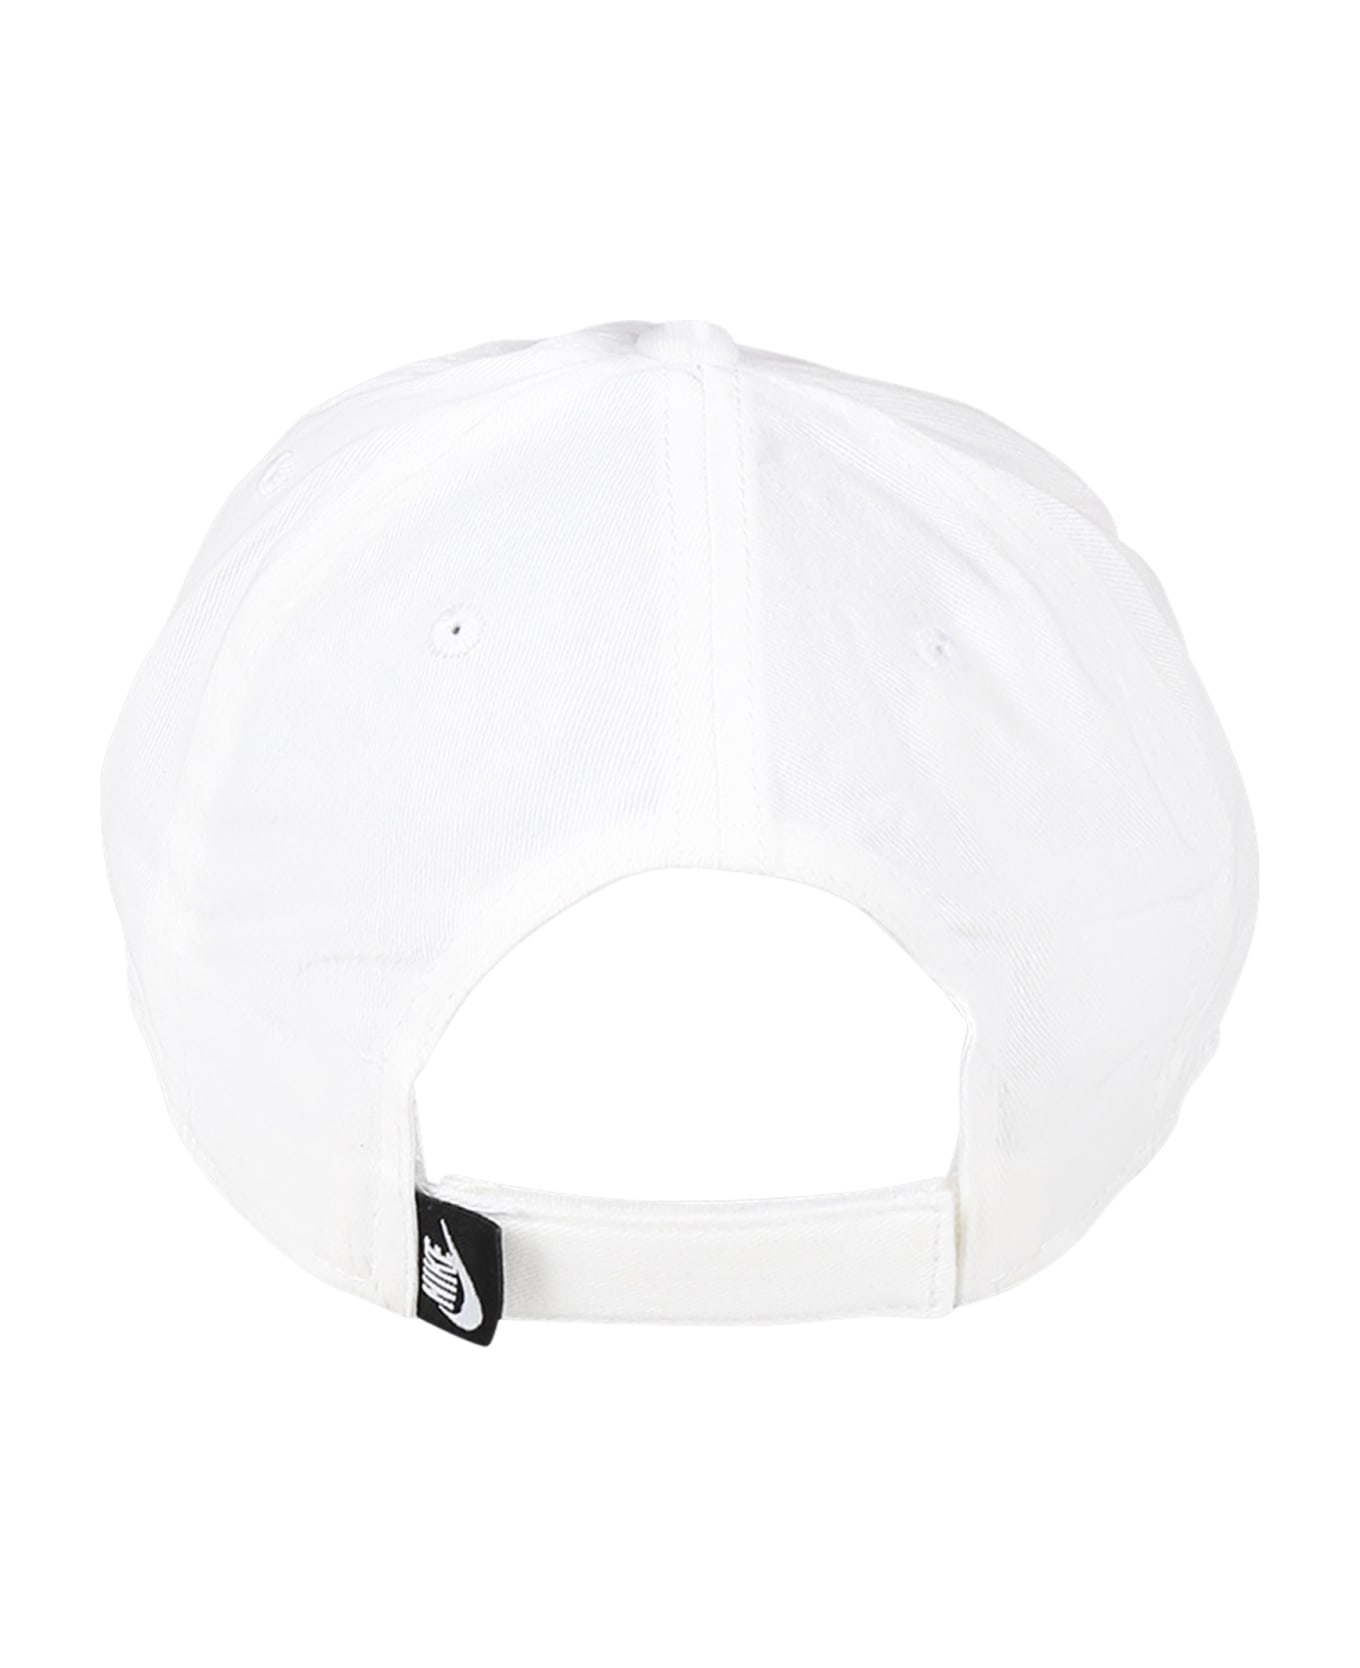 Nike White Hat For Kids With Logo - White